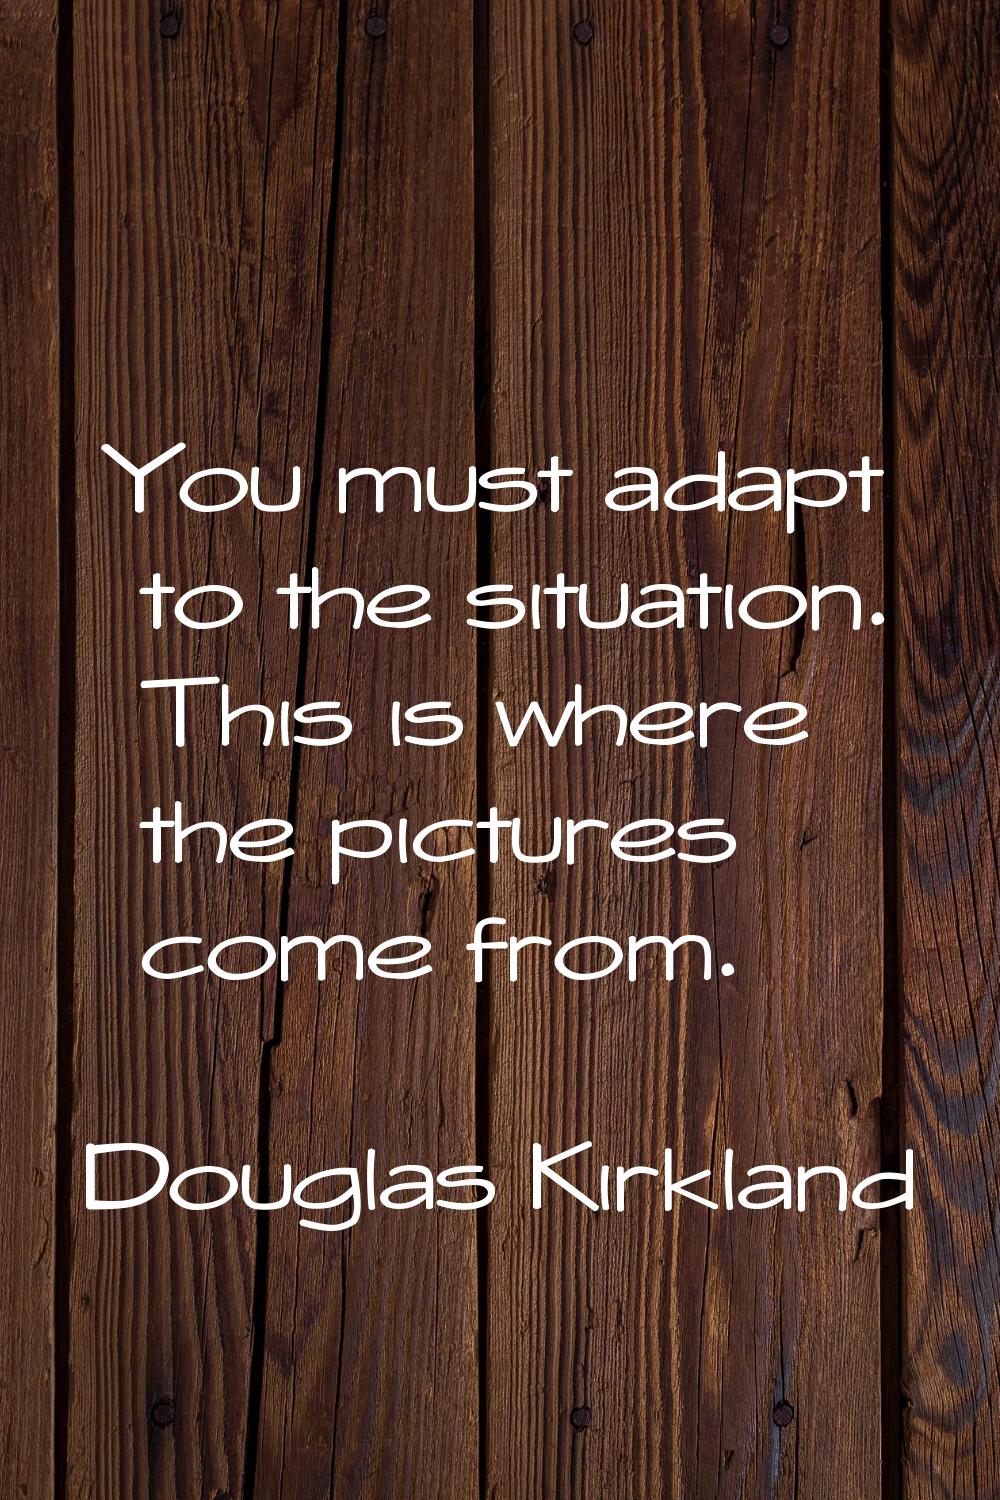 You must adapt to the situation. This is where the pictures come from.